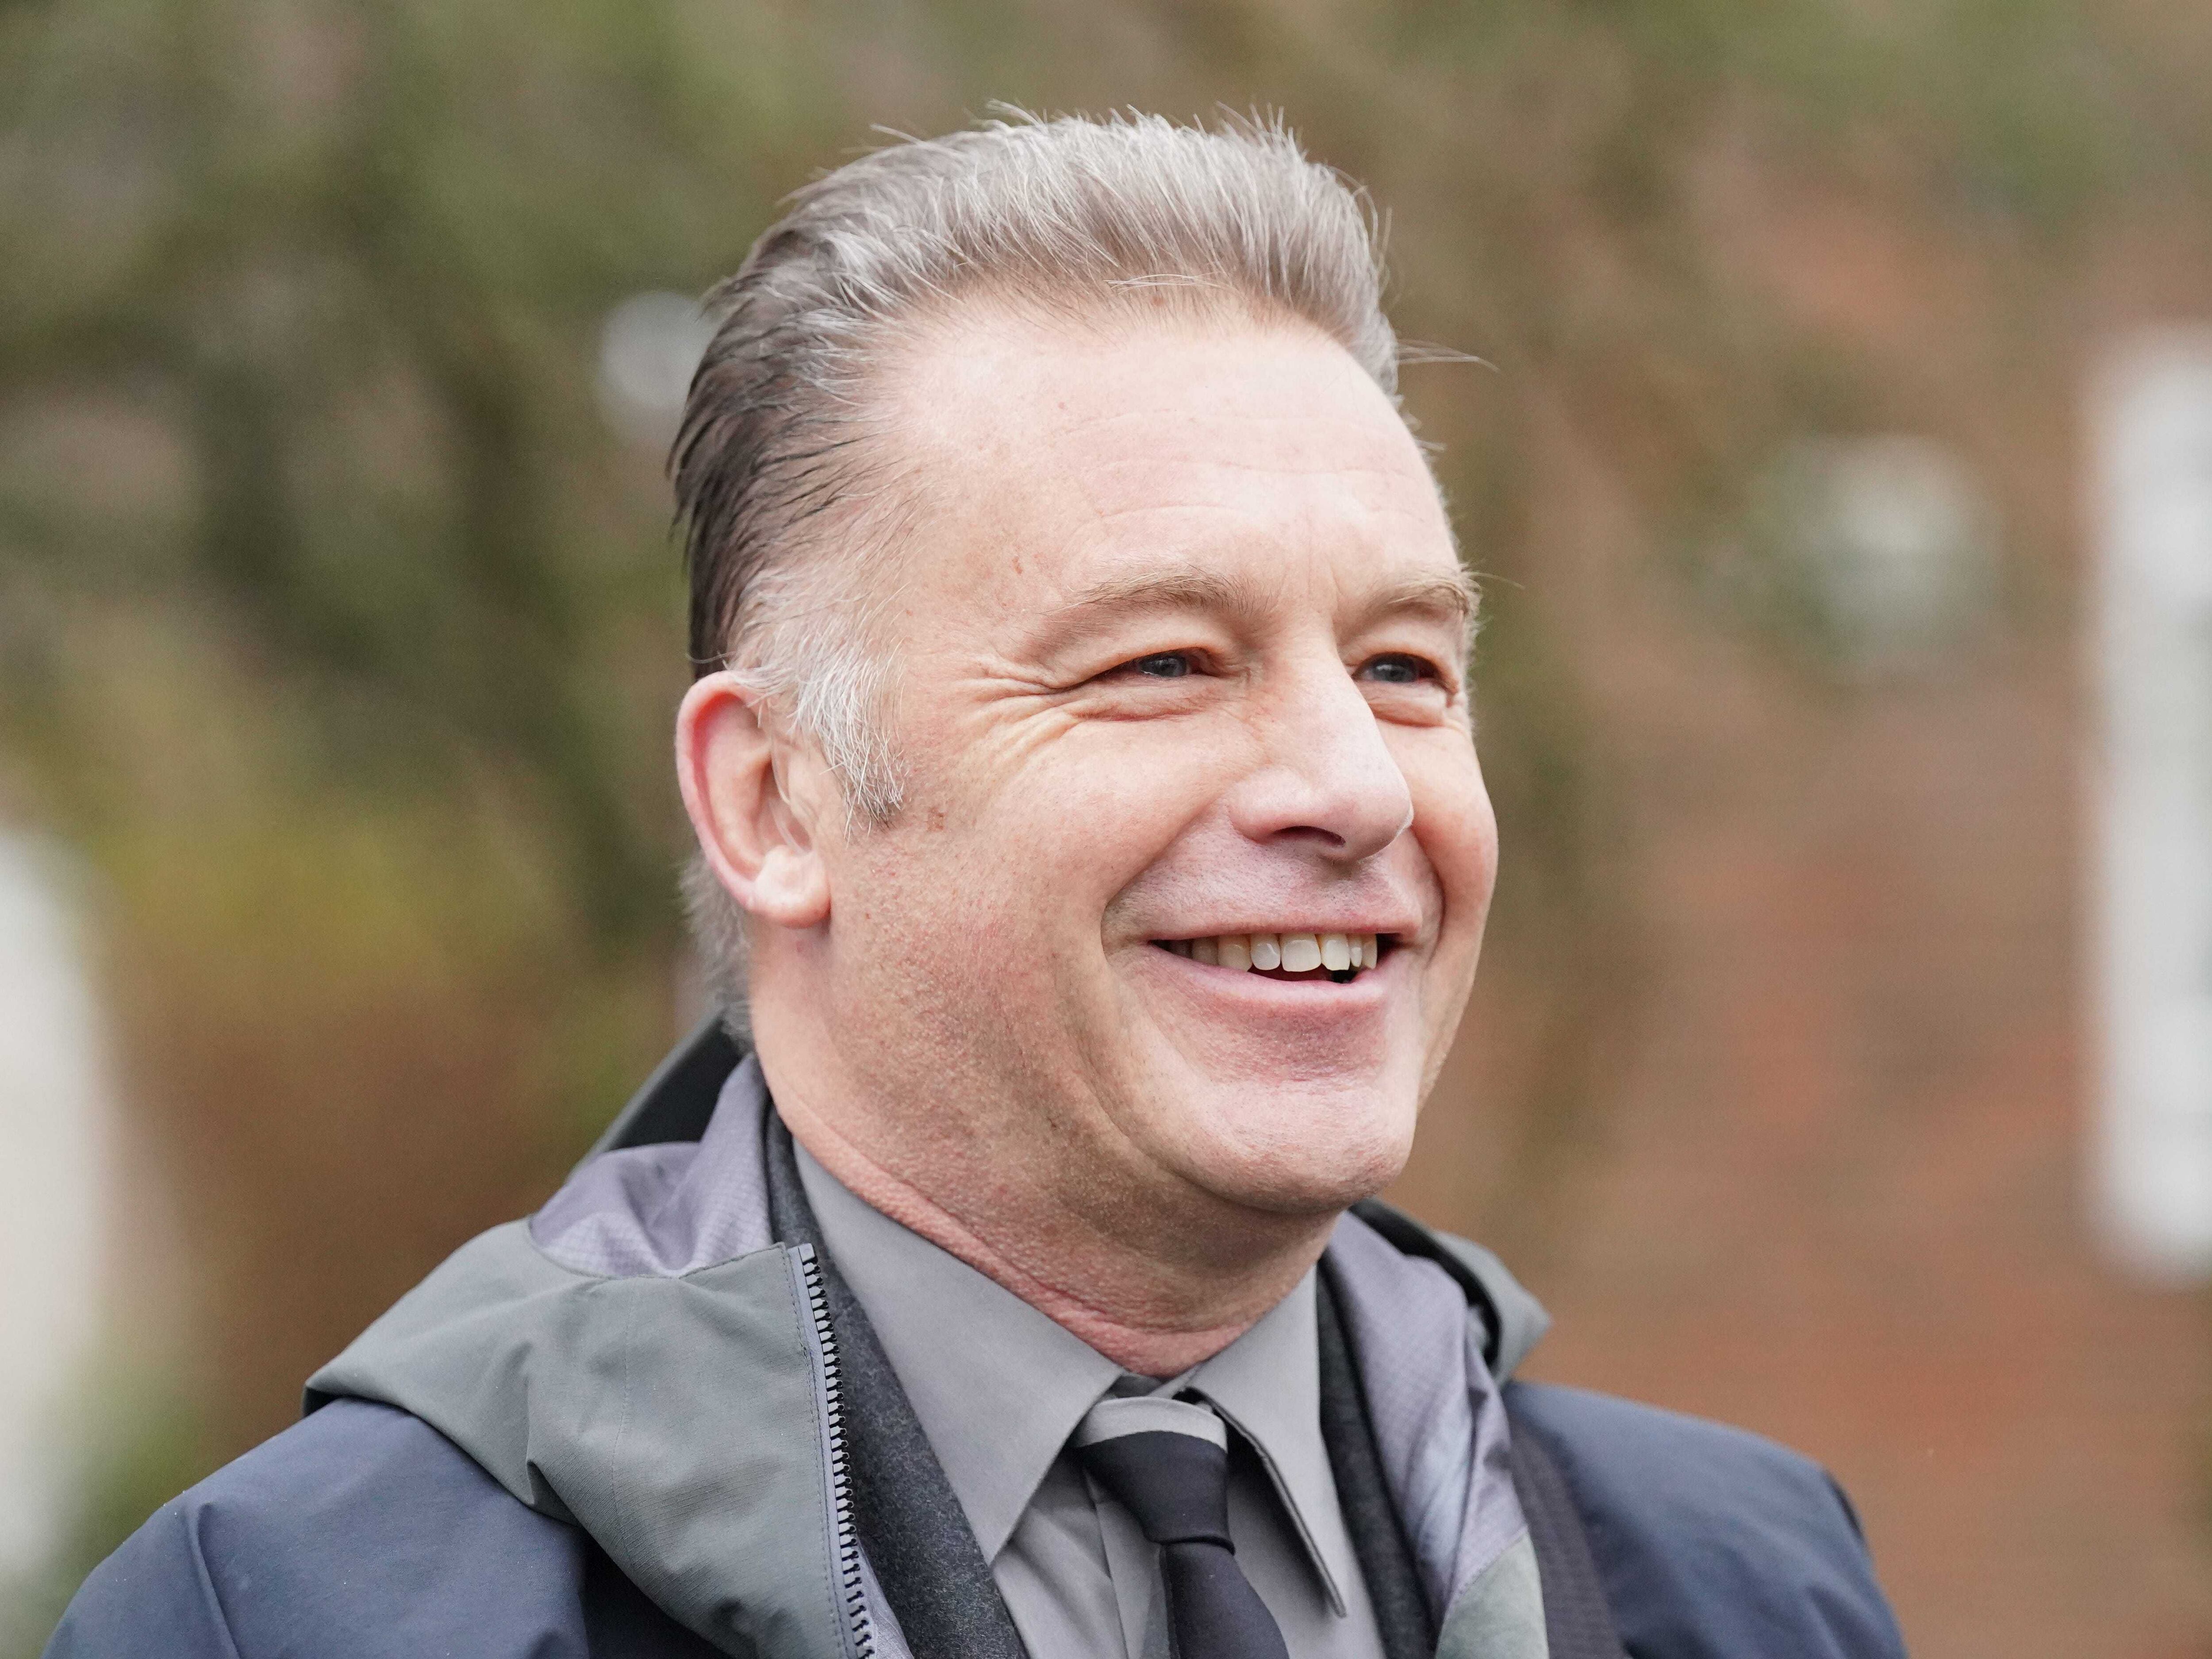 Chris Packham: I loathed myself and thought I was broken before autism diagnosis